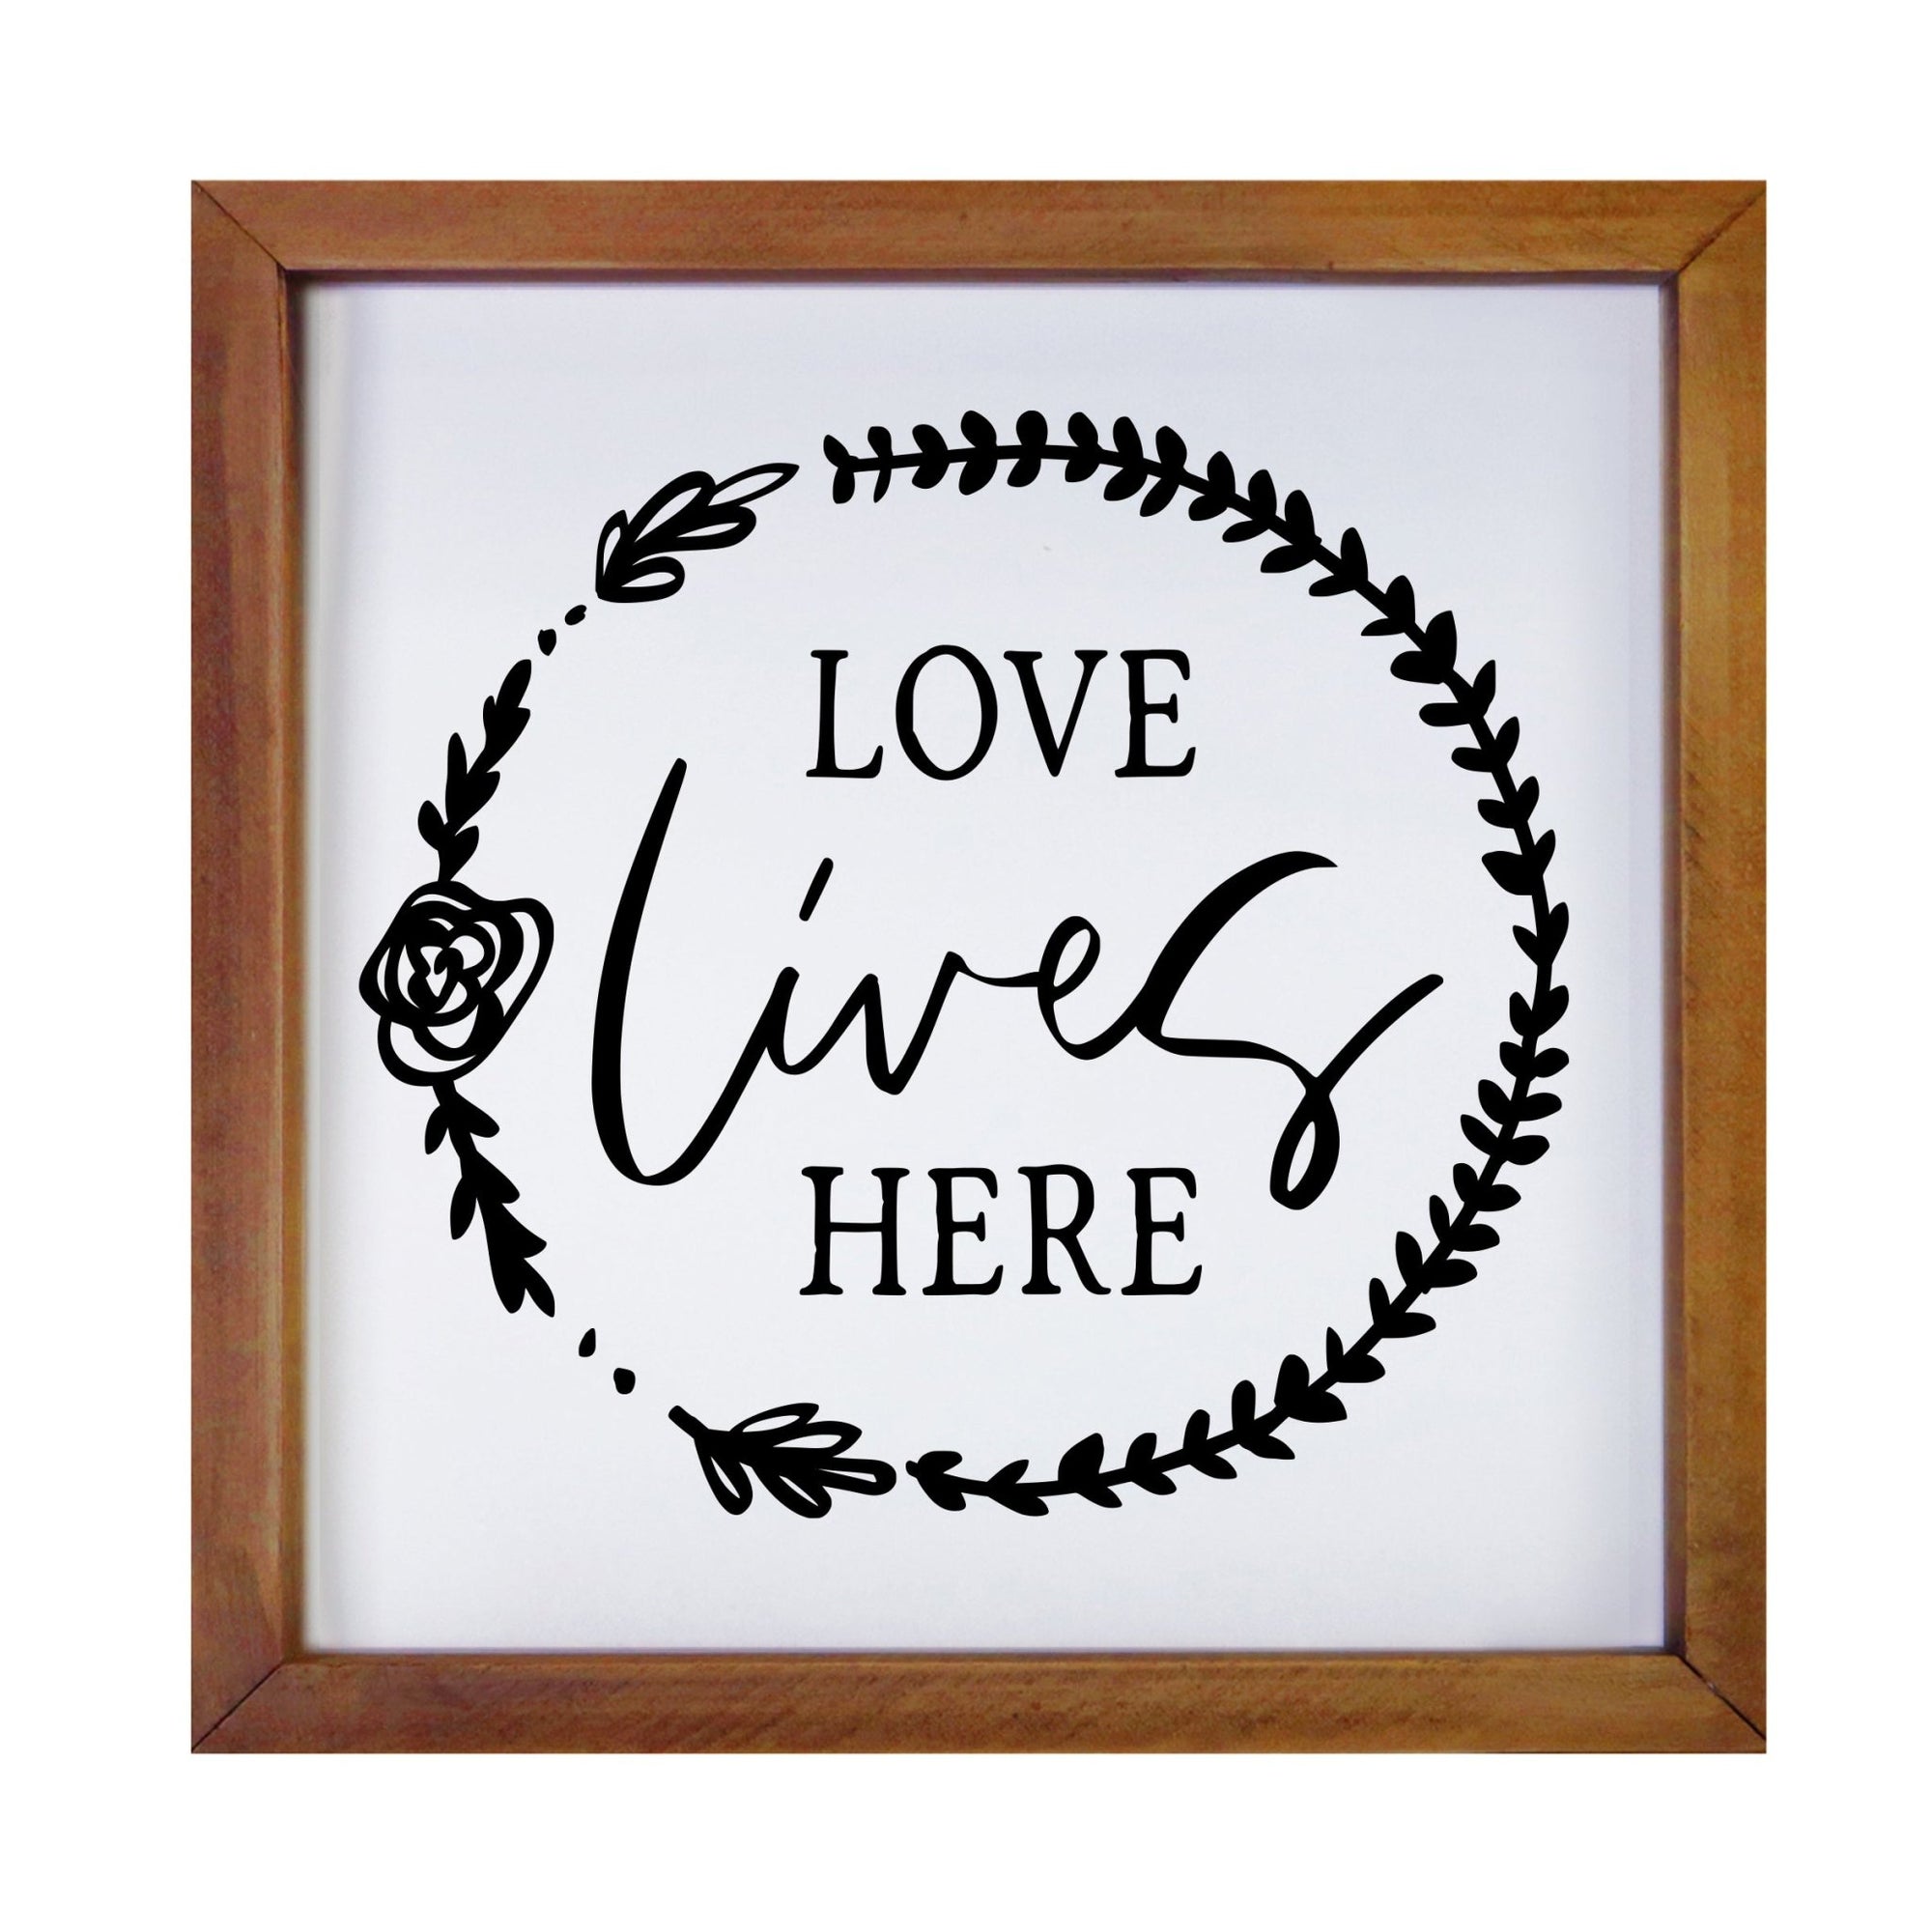 Inspiring Modern Framed Shadow Box 7x7in - Love Lives Here - LifeSong Milestones